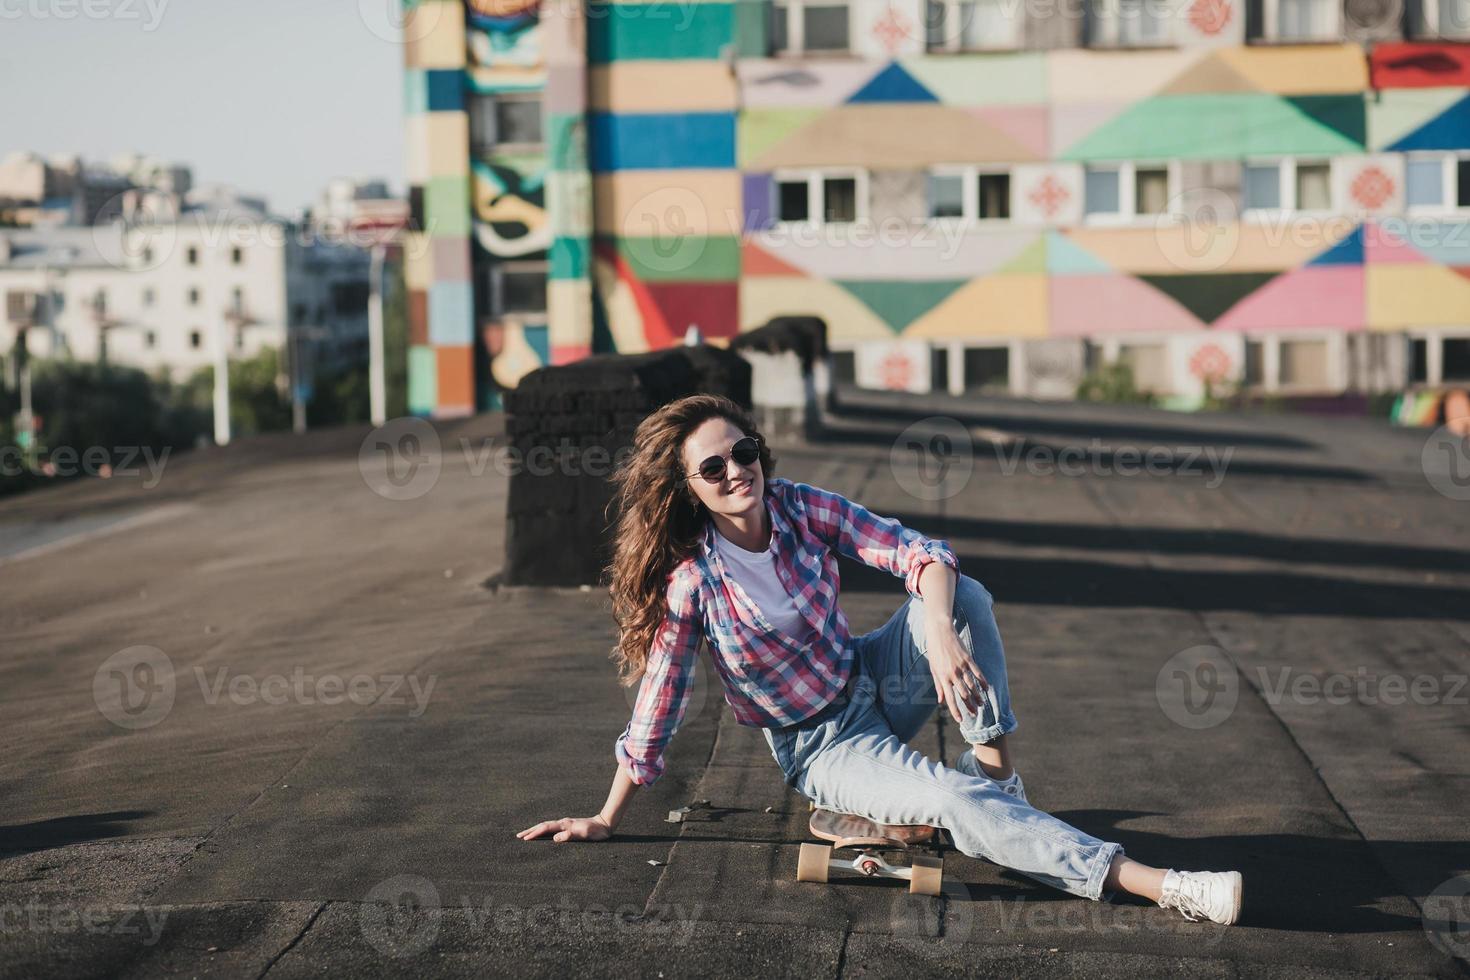 student woman in sunglasses and sitting on skateboard photo